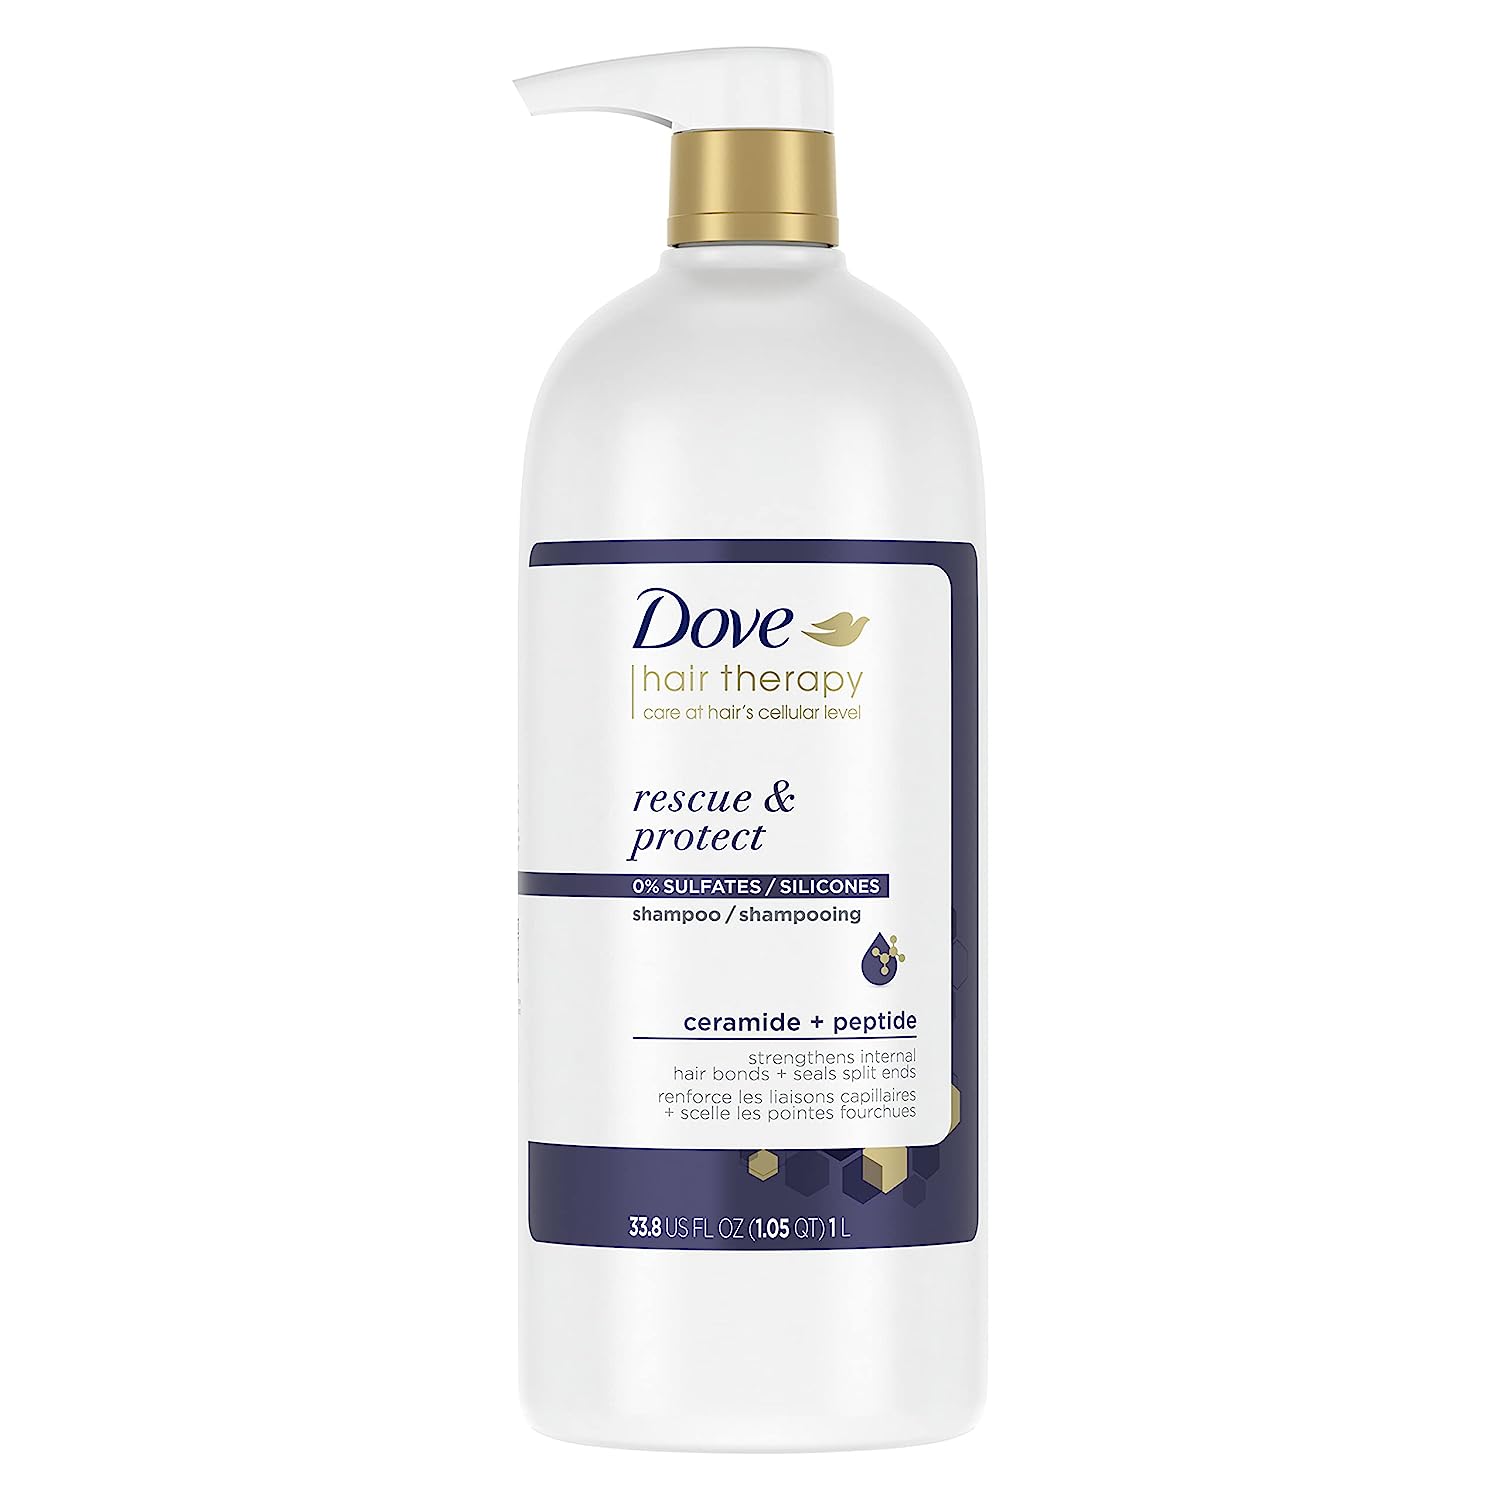 Dove Hair Therapy Shampoo Hair Care For Split Ends and [...]